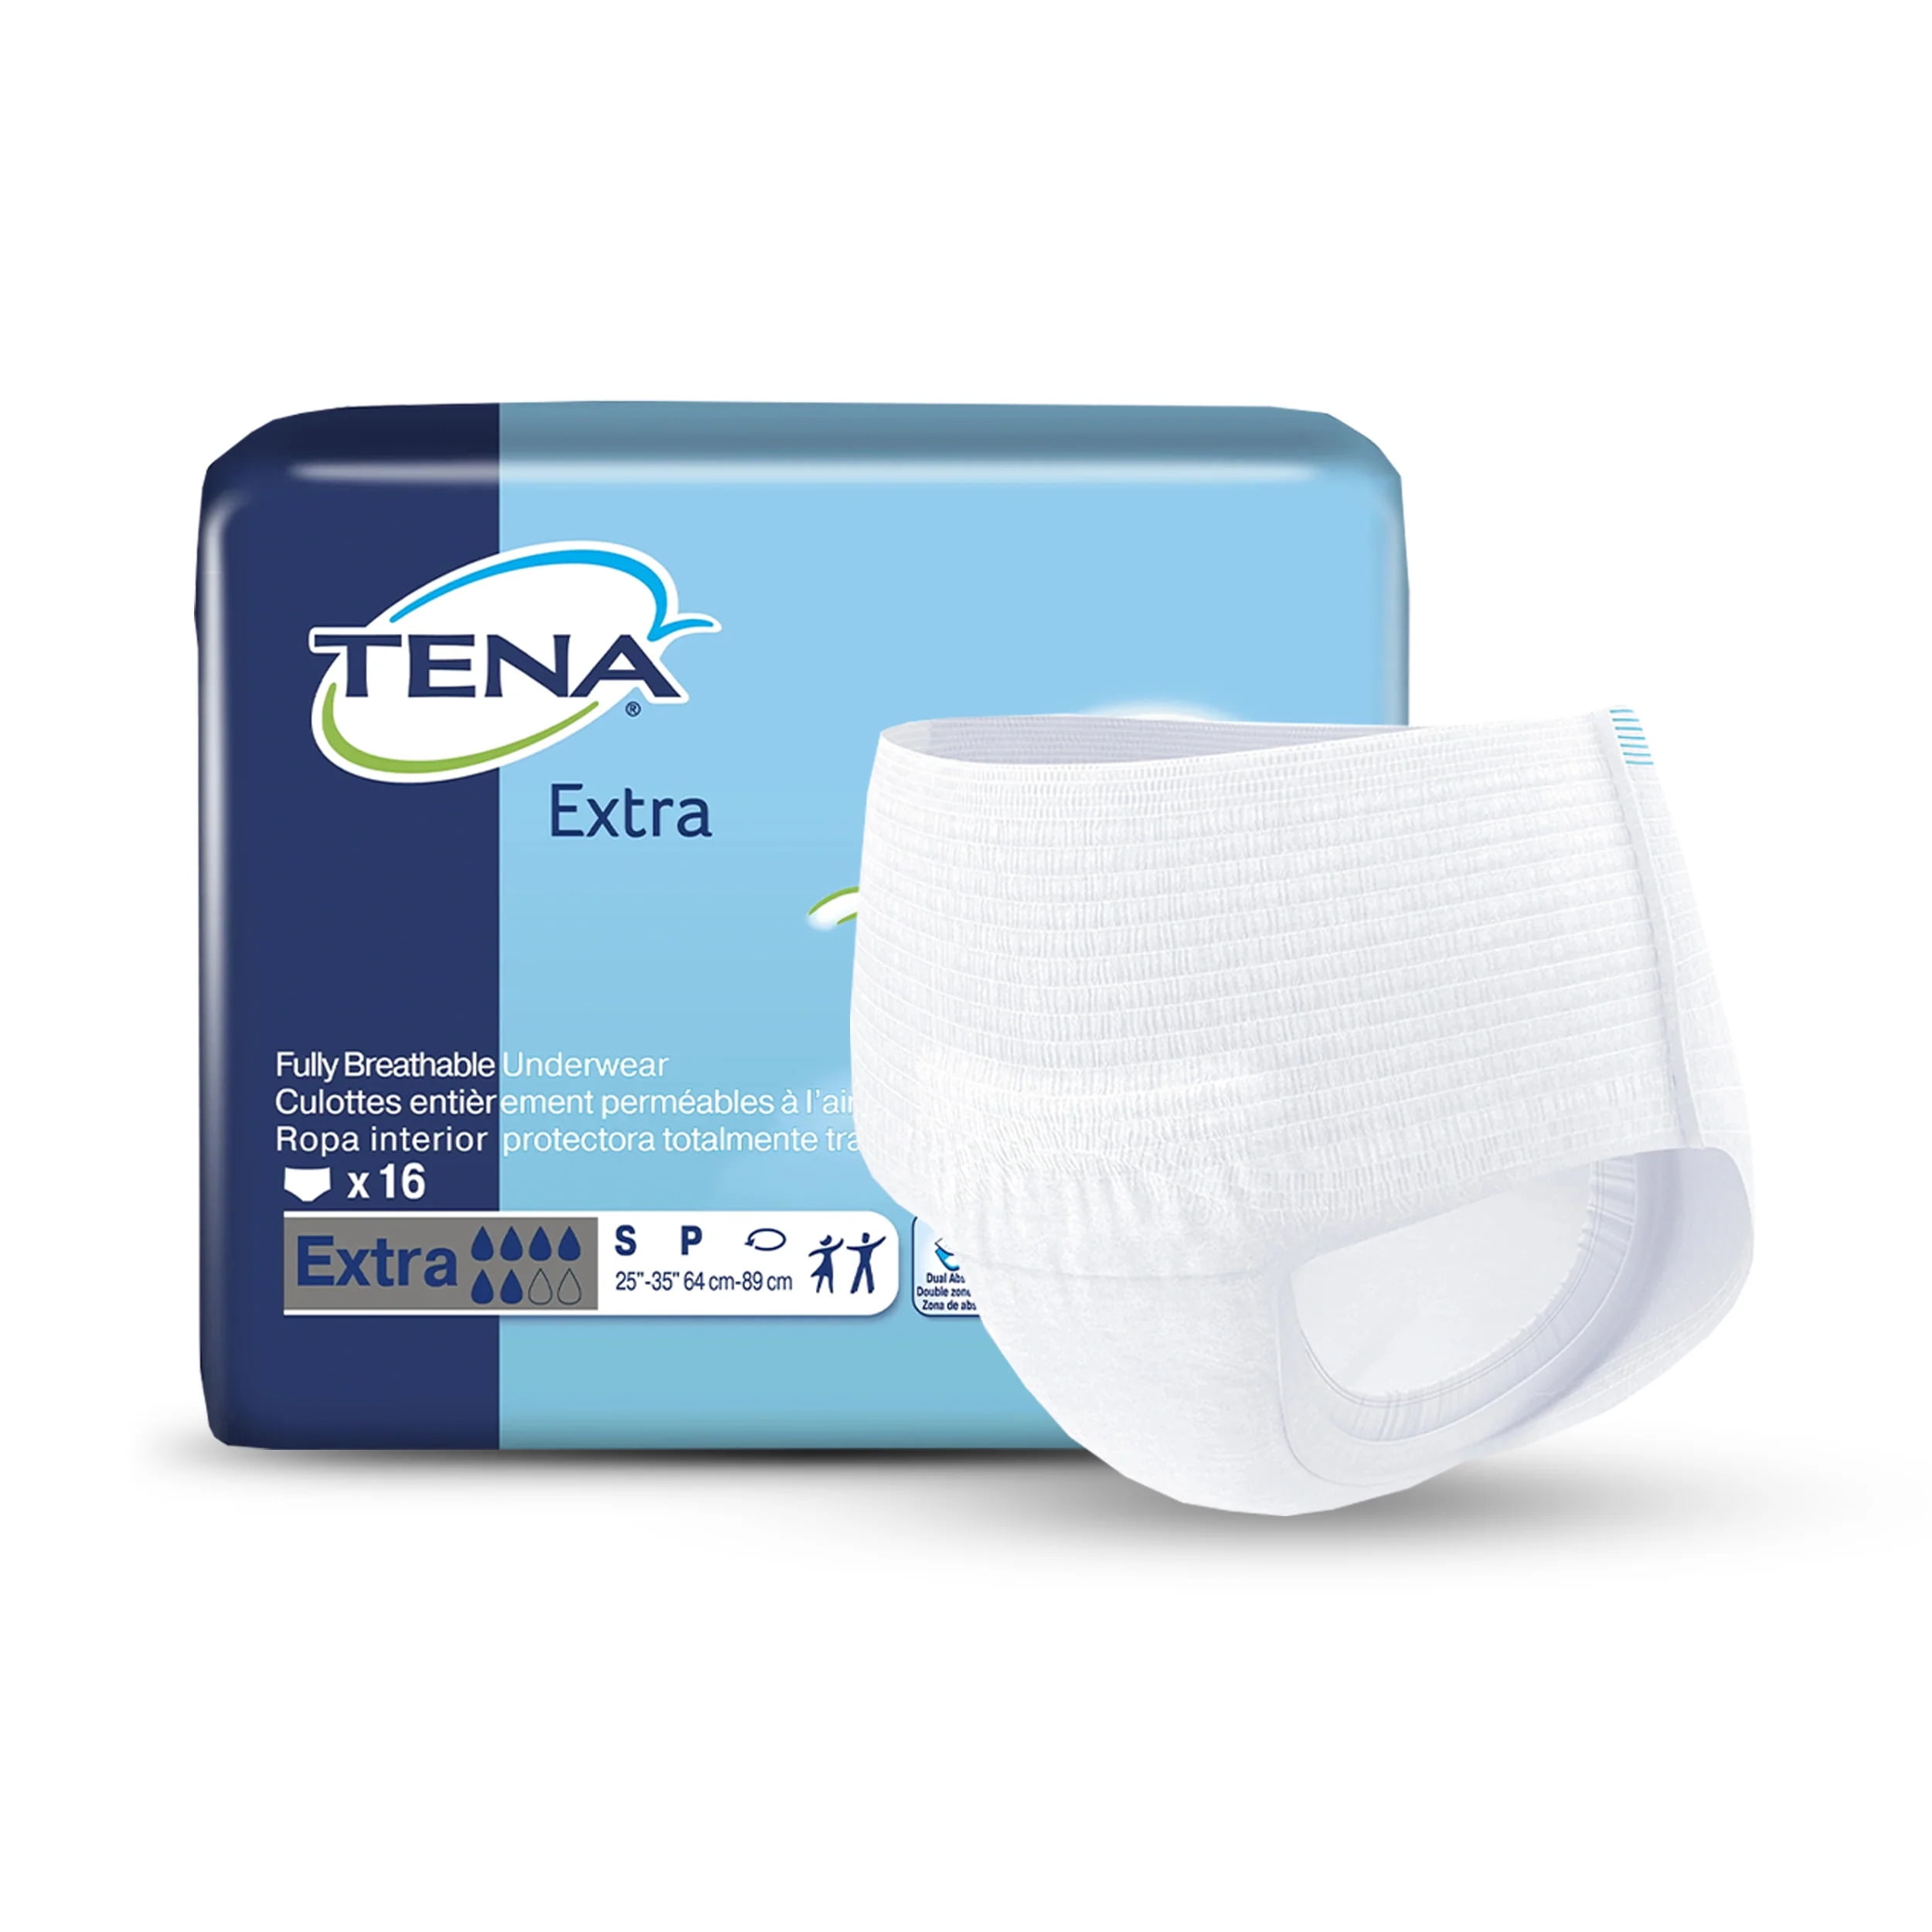 TENA ProSkin Extra Breathable Underwear, Incontinence, Disposable, Medium,  16 Ct 